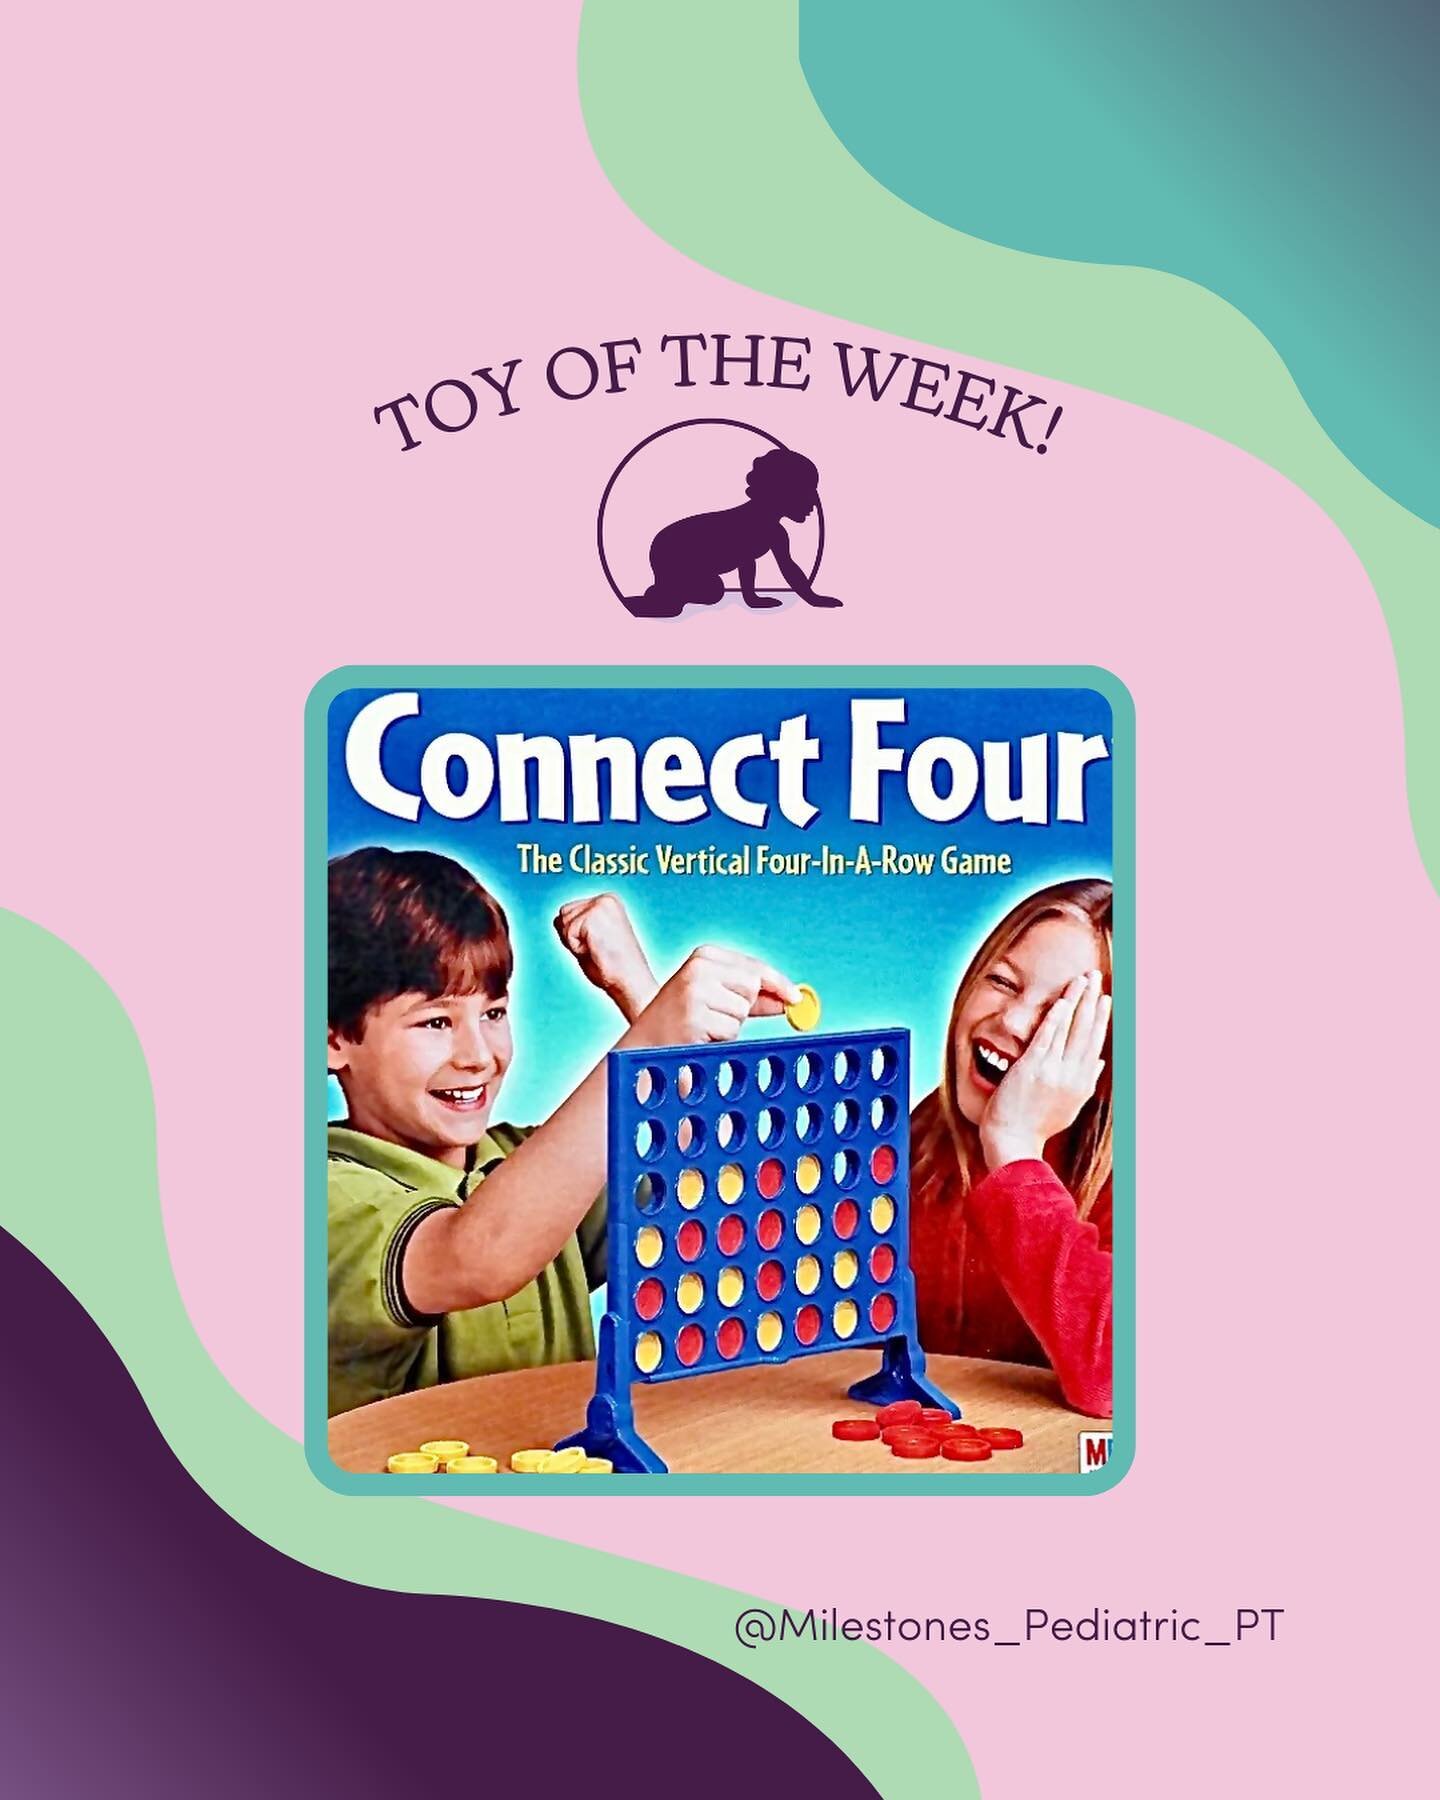 Toy of the Week ~ Connect 4 

Simple, classic fun for the whole family! 

Connect 4 can be played with kids as young as 5 years old once the child begins thinking more concretely, with reasoning and logic! But younger kids will enjoy placing the coin